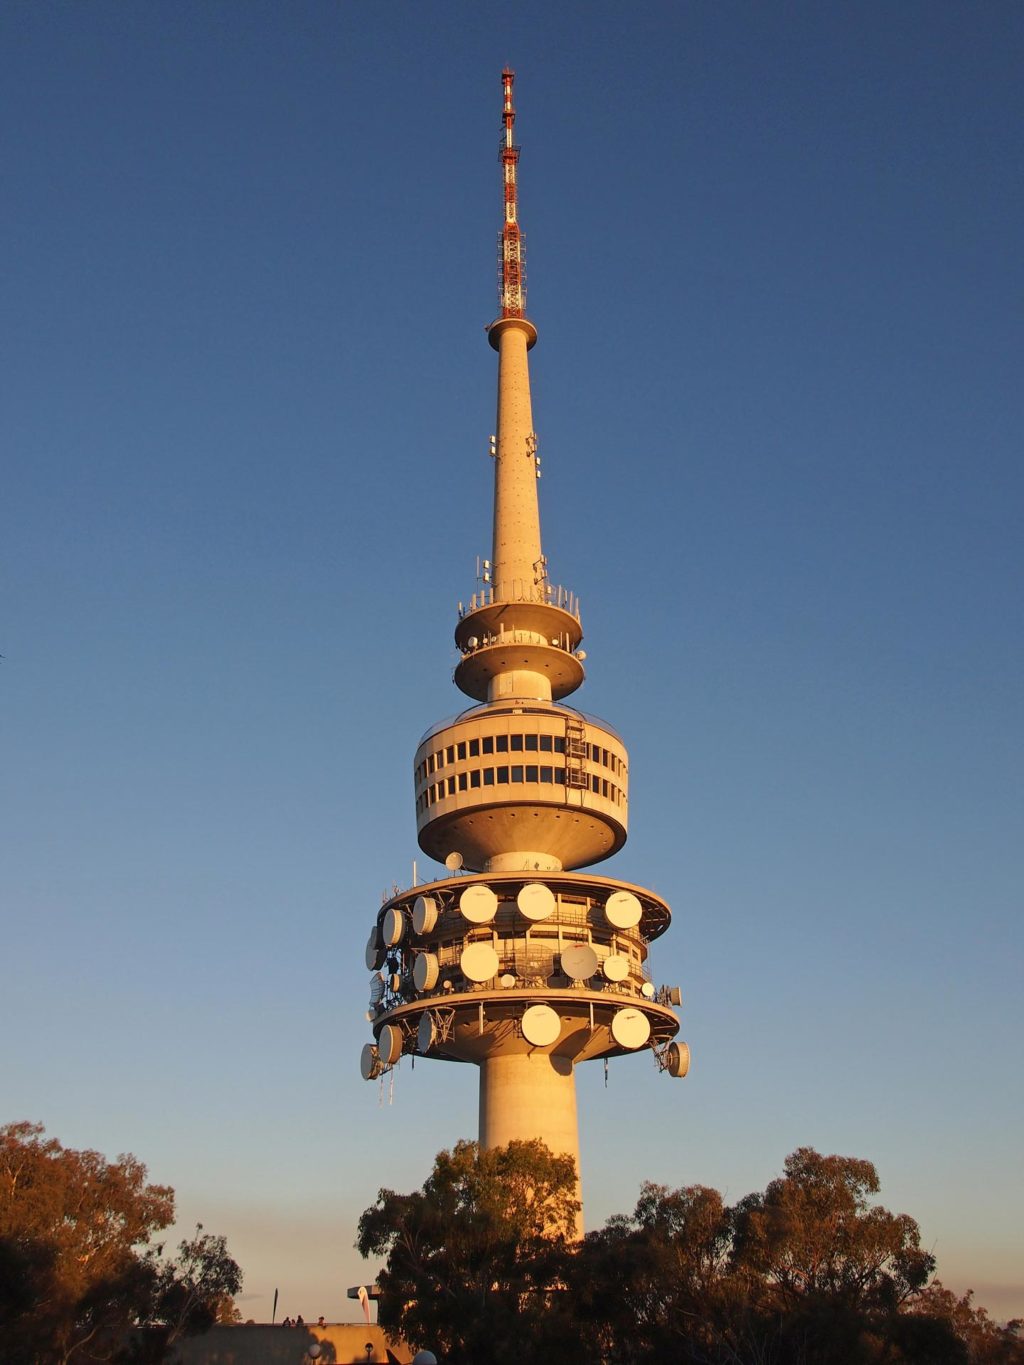 Black Mountain Tower (ehemals Telstra Tower) in Canberra